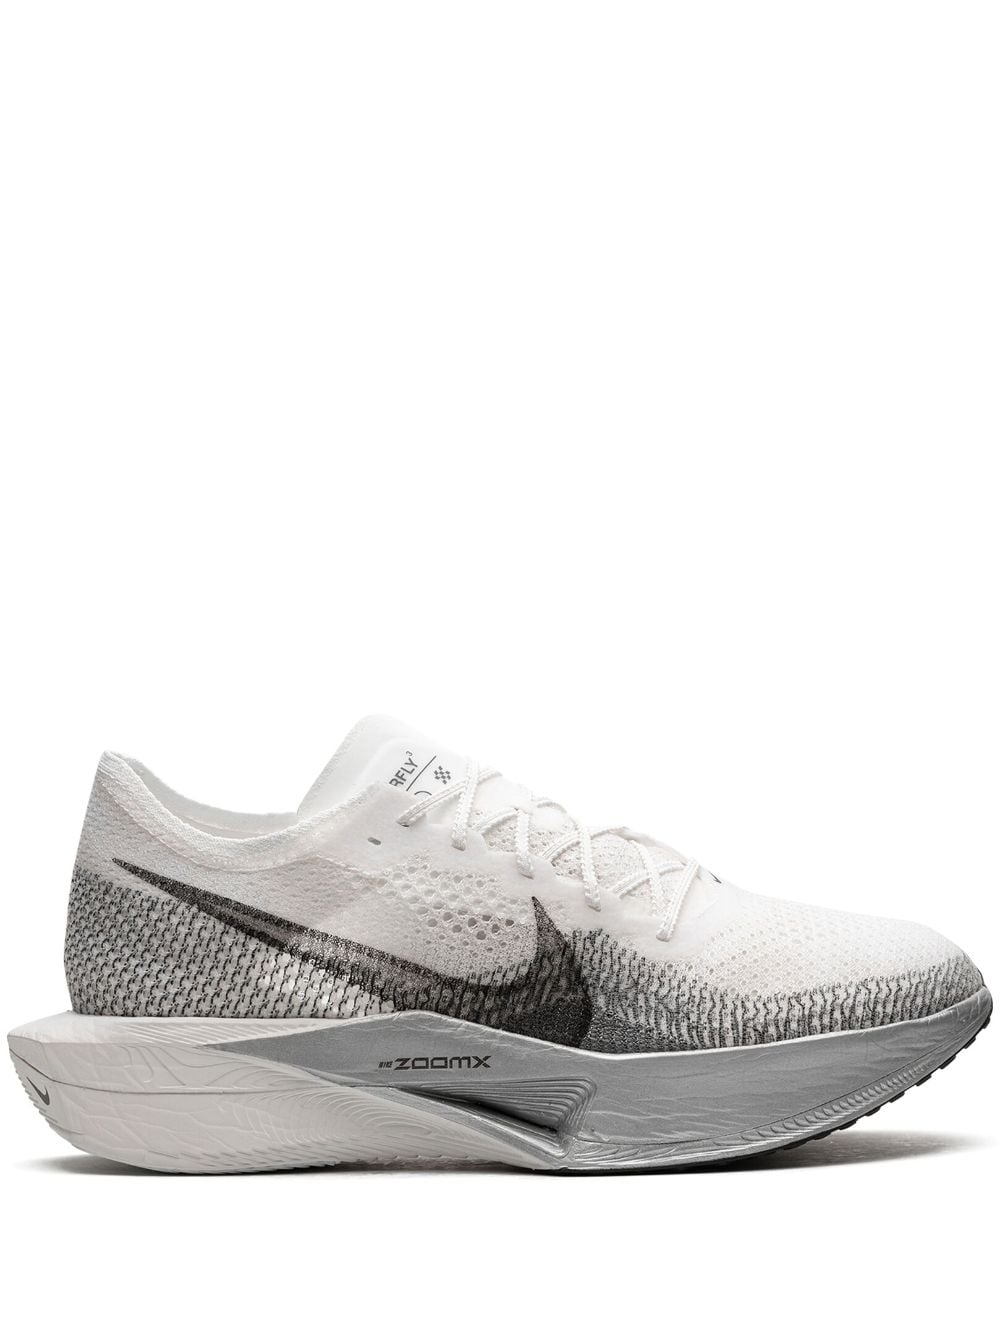 Nike ZoomX Vaporfly Next% 3 White Particle Grey Sneakers - Weiß